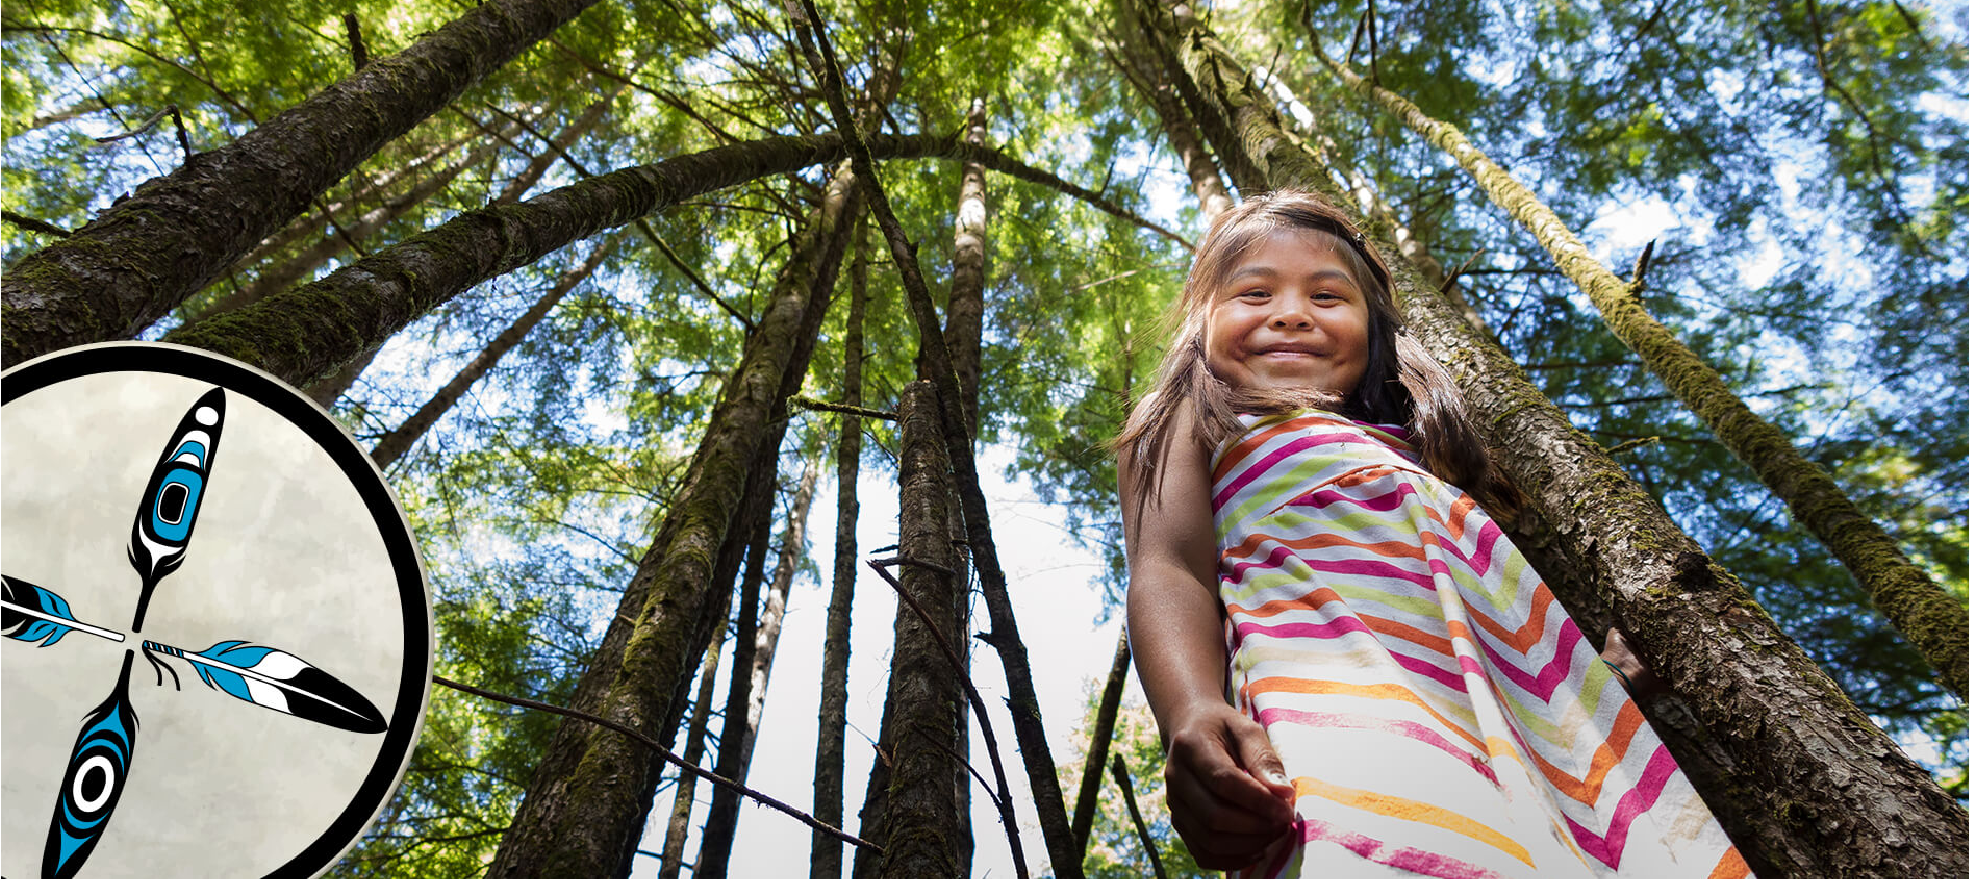 Smiling Indigenous child standing in a forest